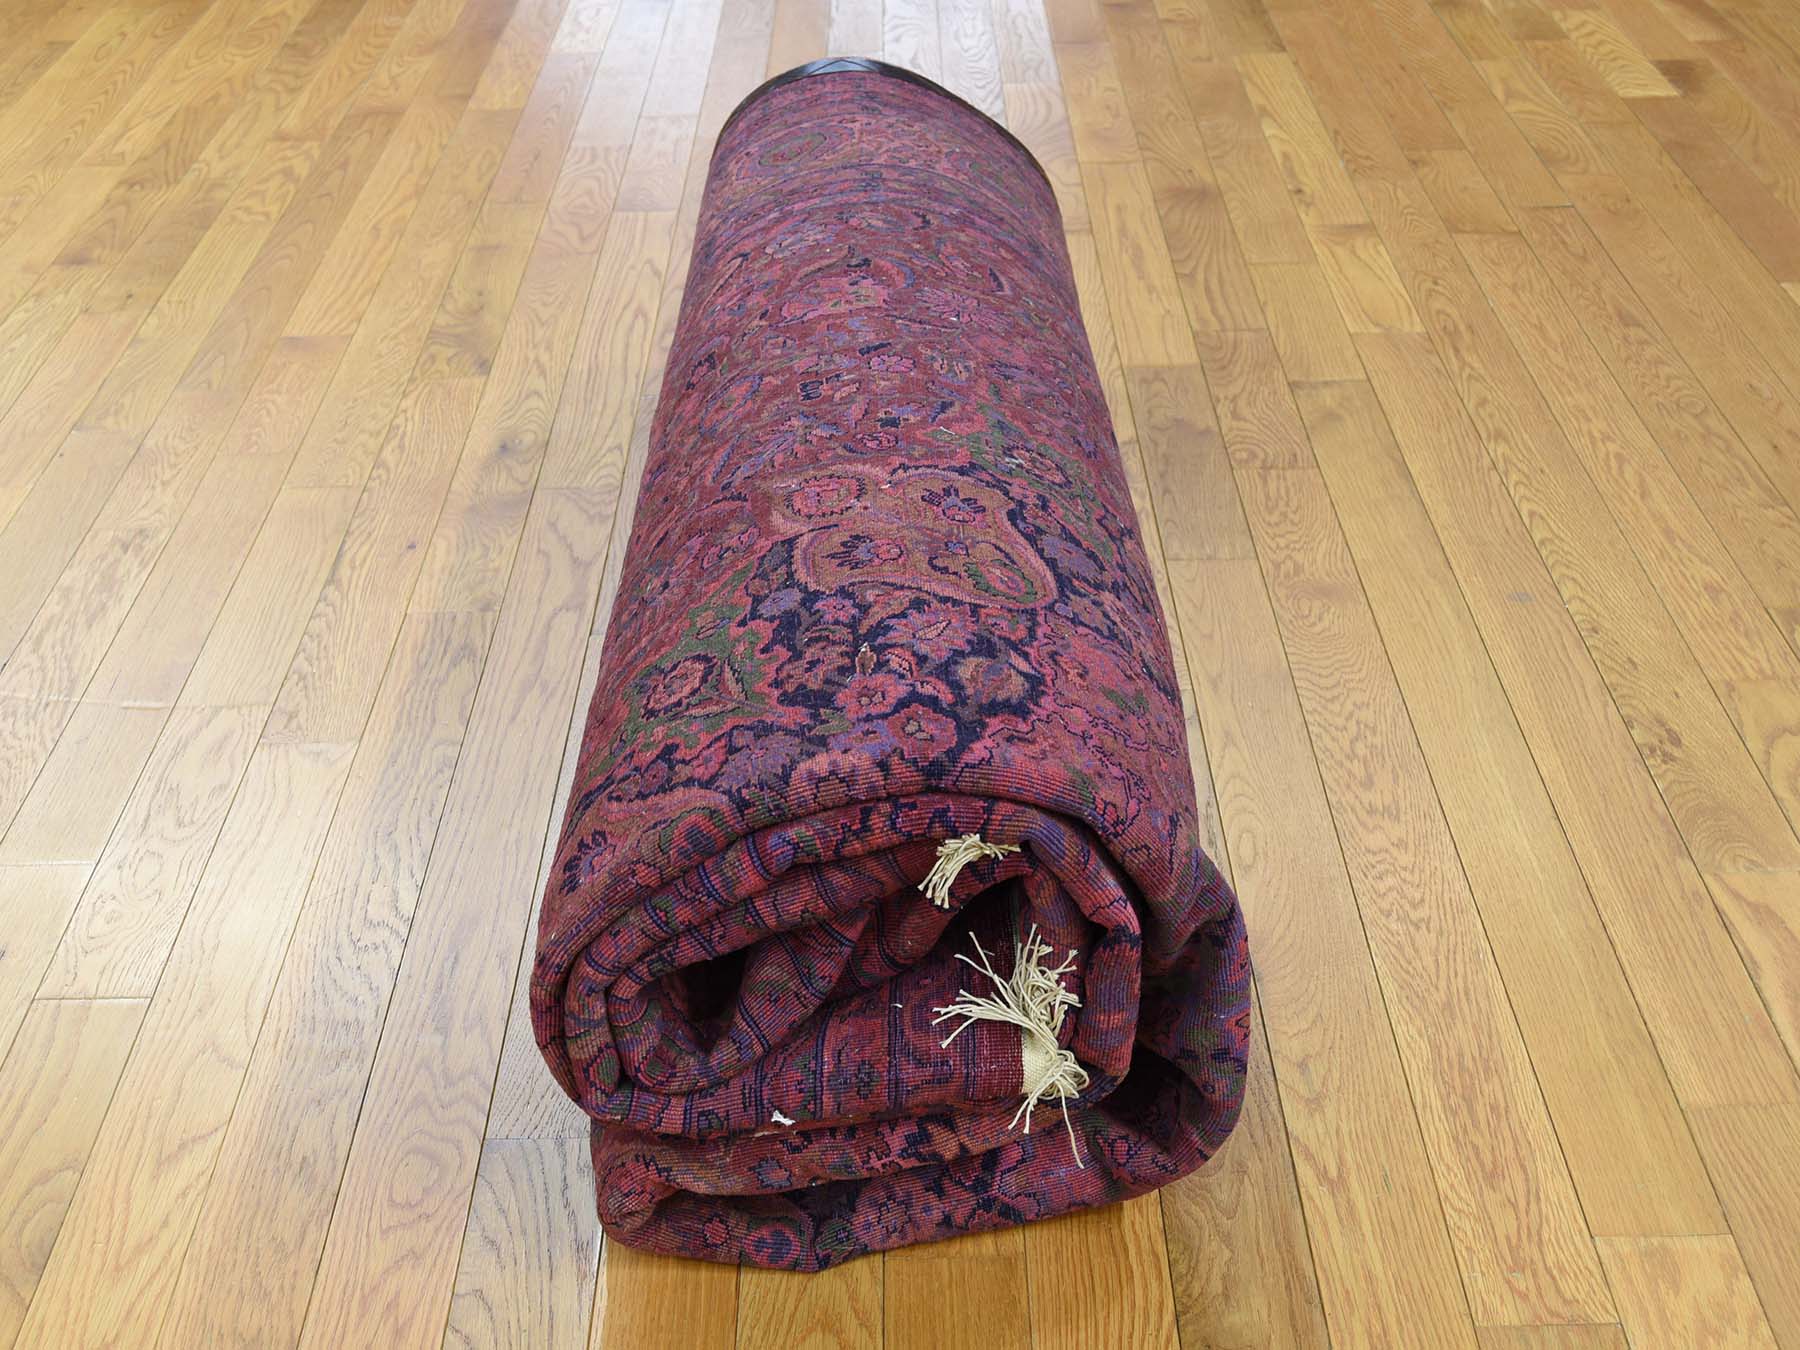 Overdyed & Vintage Rugs LUV355671